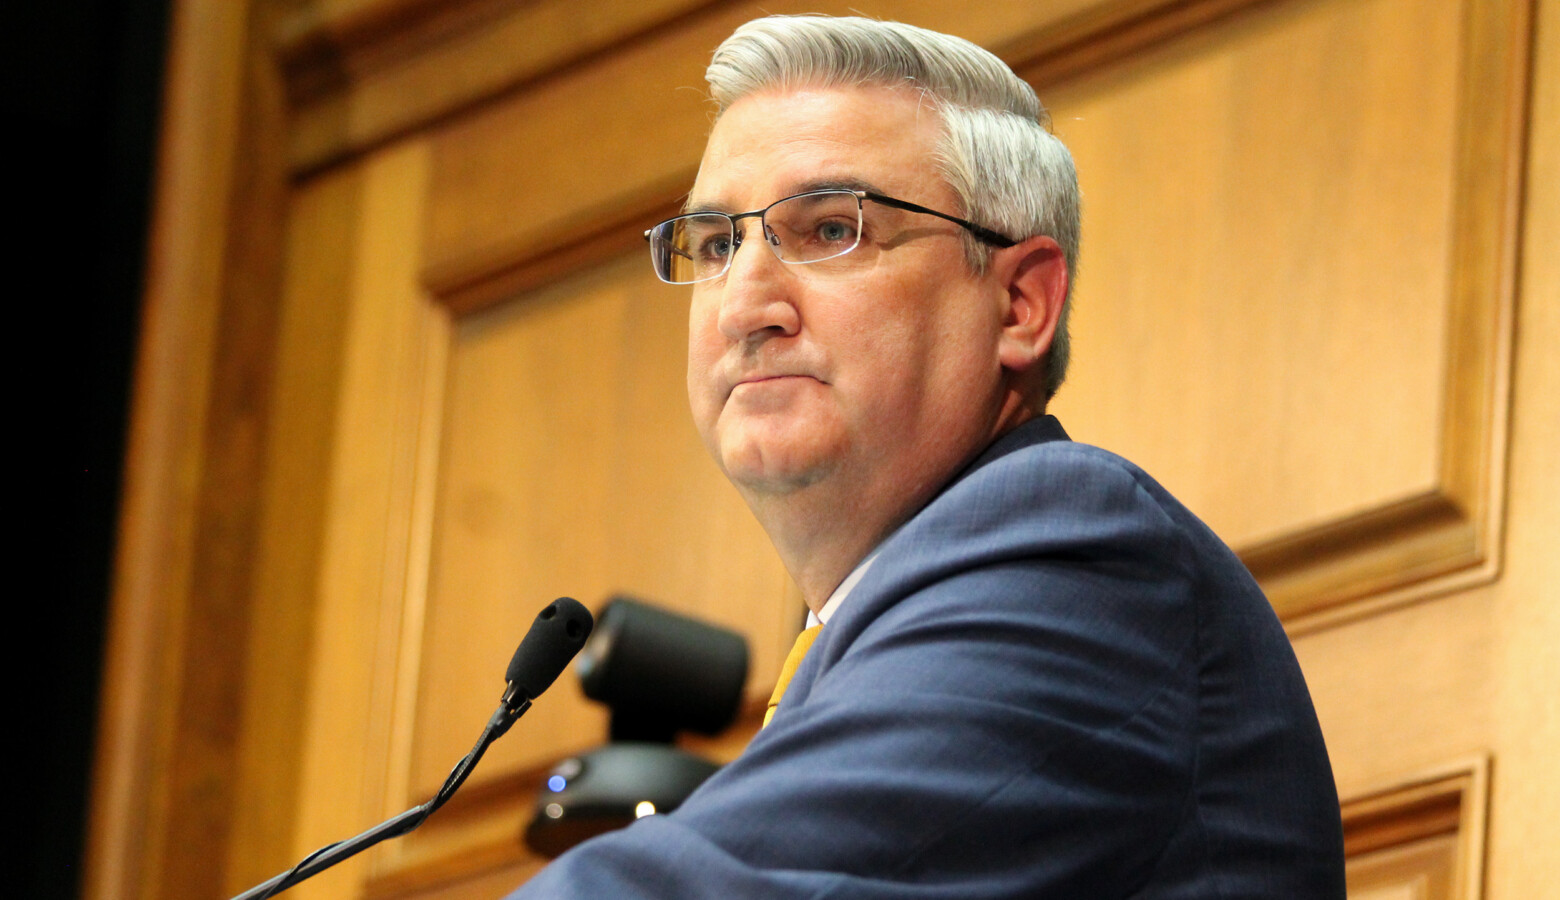 At his weekly press briefing on Wednesday, Gov. Eric Holcomb said the state is in a much better place than early in the pandemic. (Lauren Chapman/IPB News)